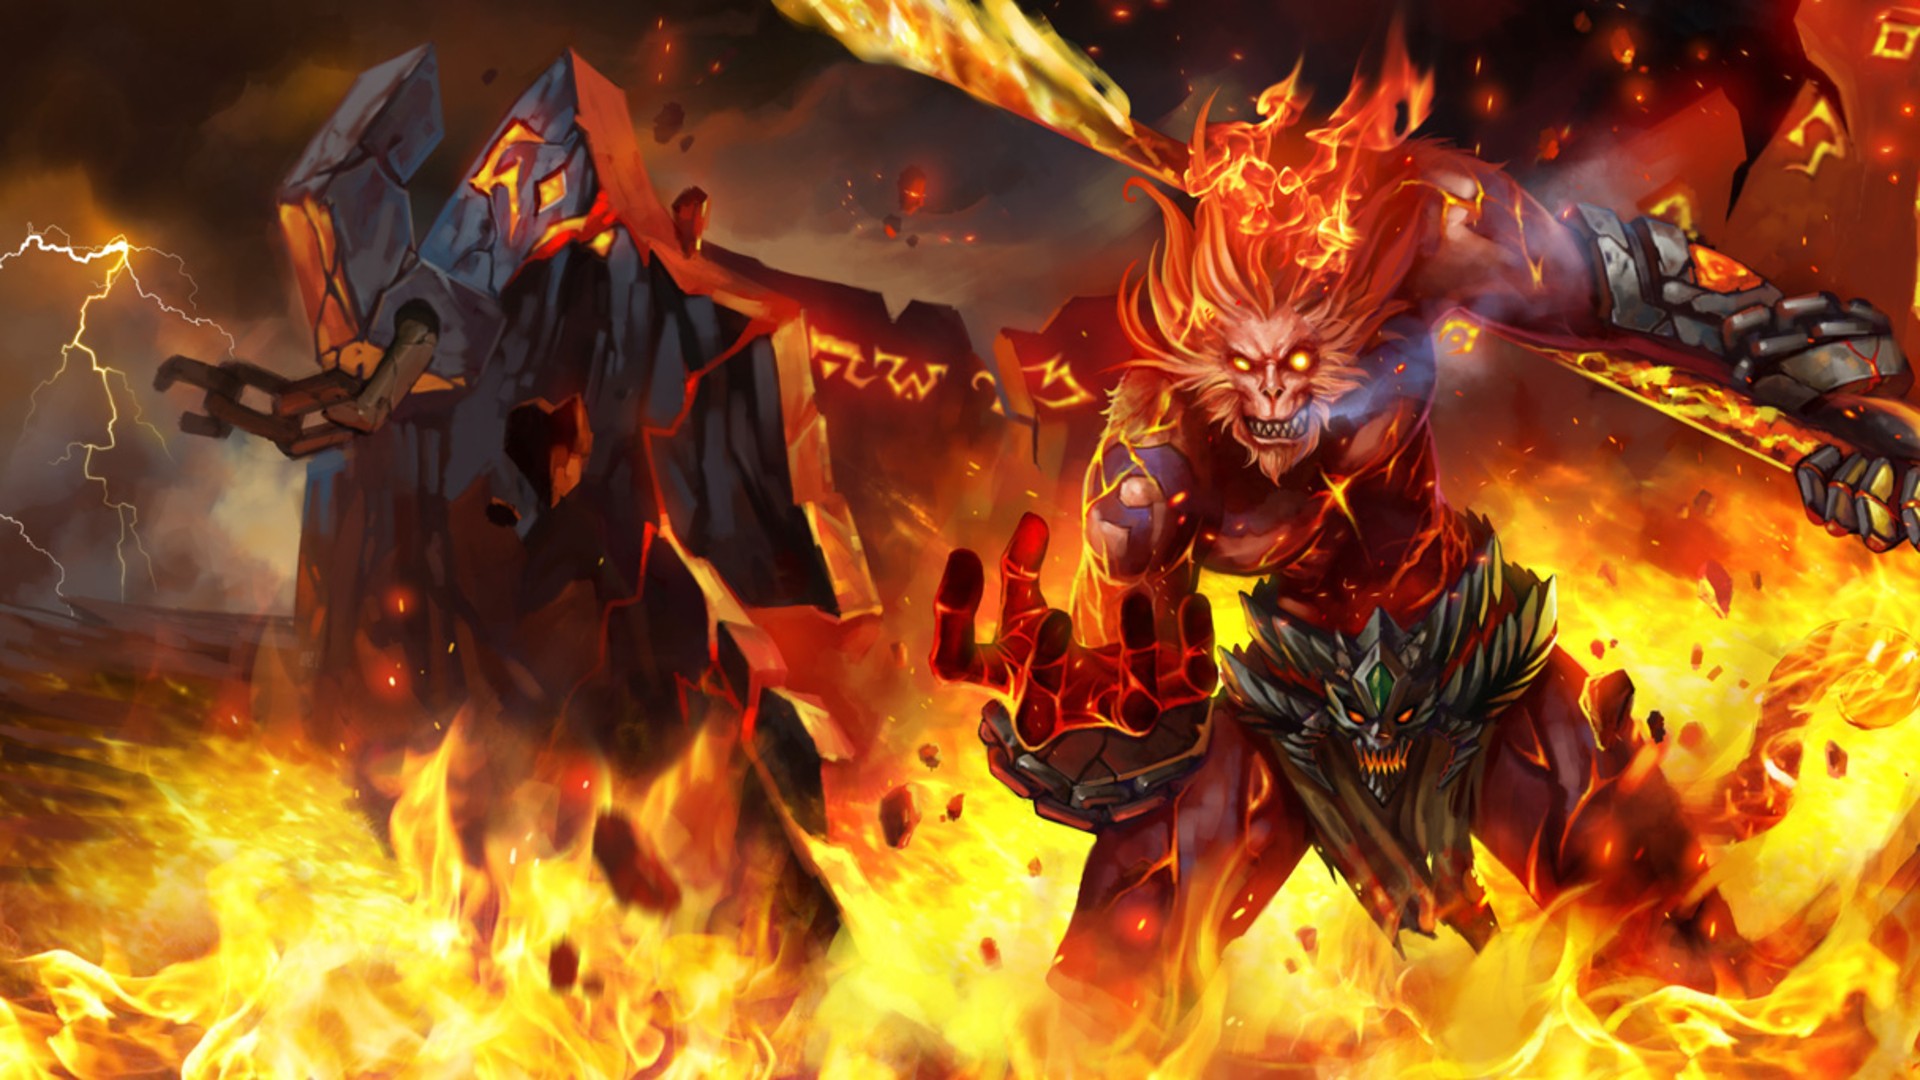 league of legends wallpaper hd 1920x1080,flame,fire,demon,fictional character,strategy video game